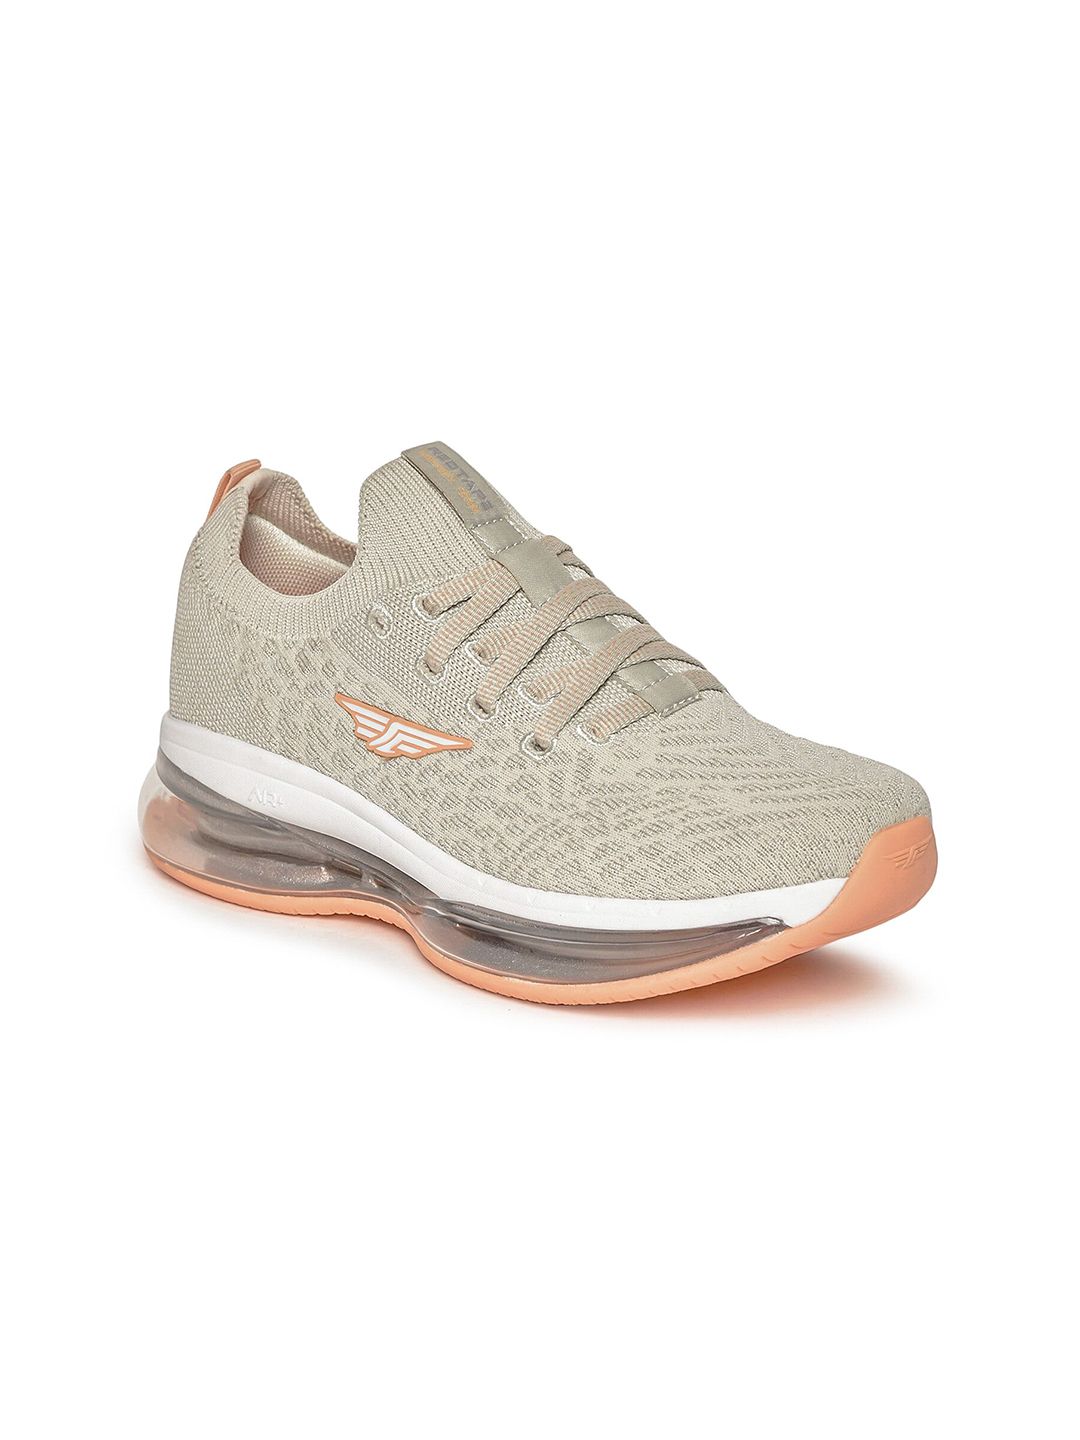 Red Tape Women Beige Mesh Walking Shoes Price in India